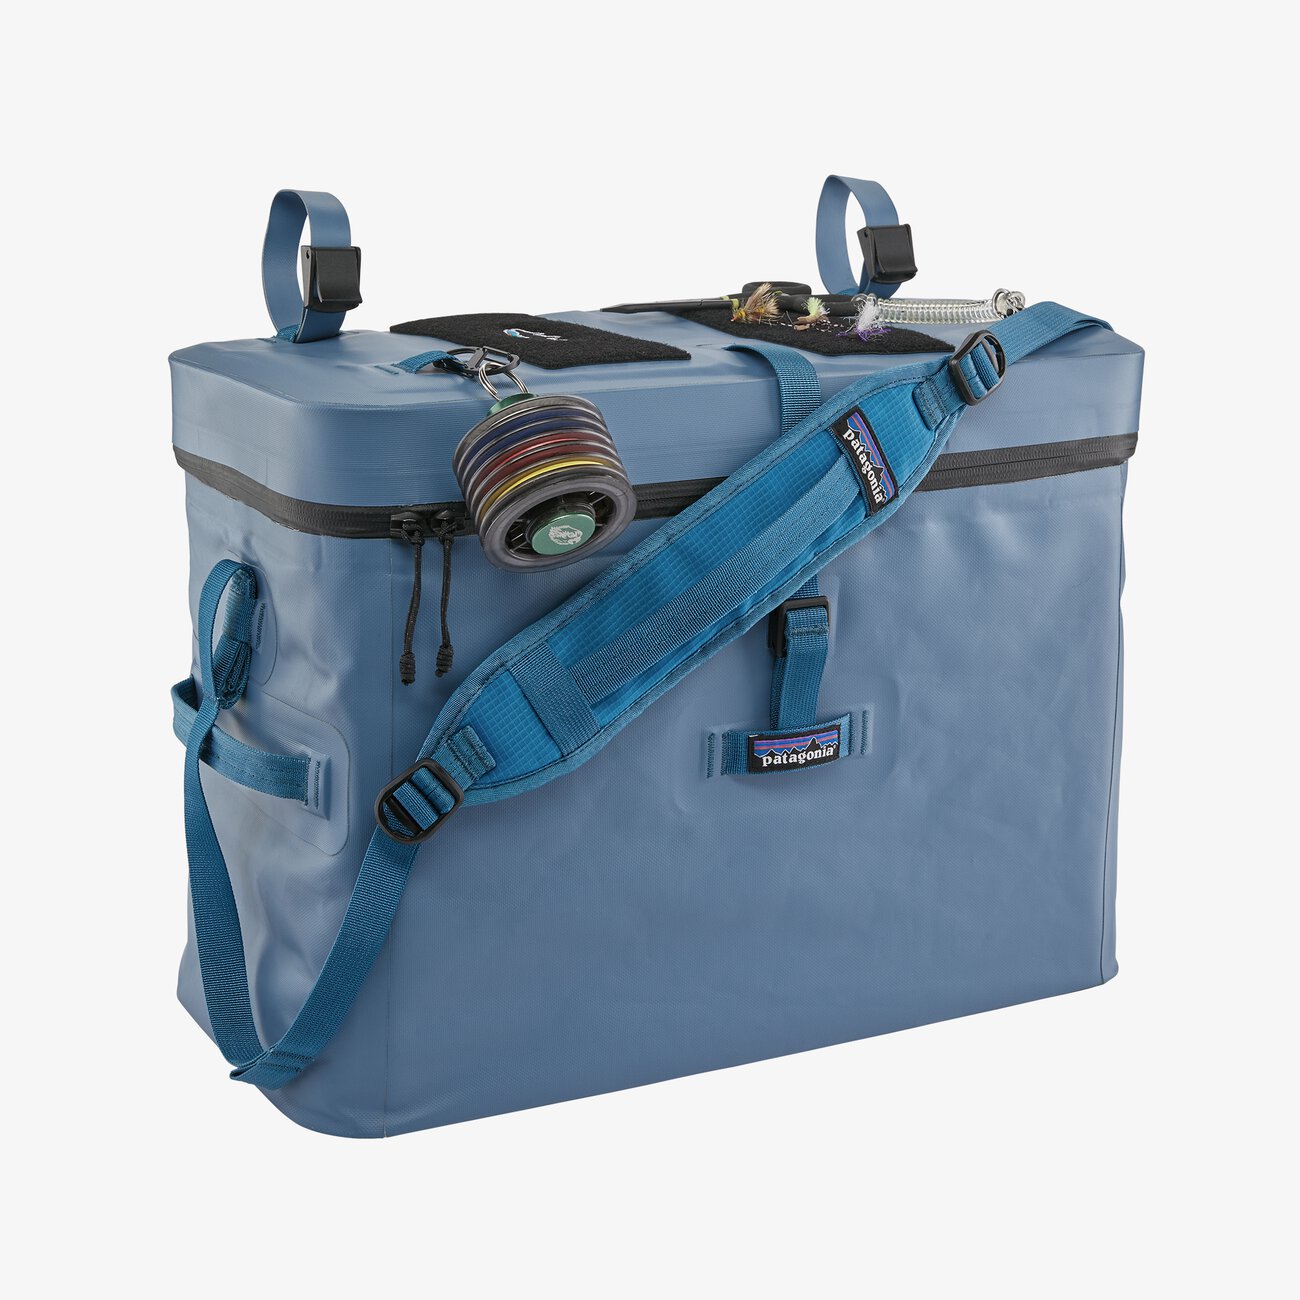 Patagonia Great Divider Boat Bag – Out Fly Fishing